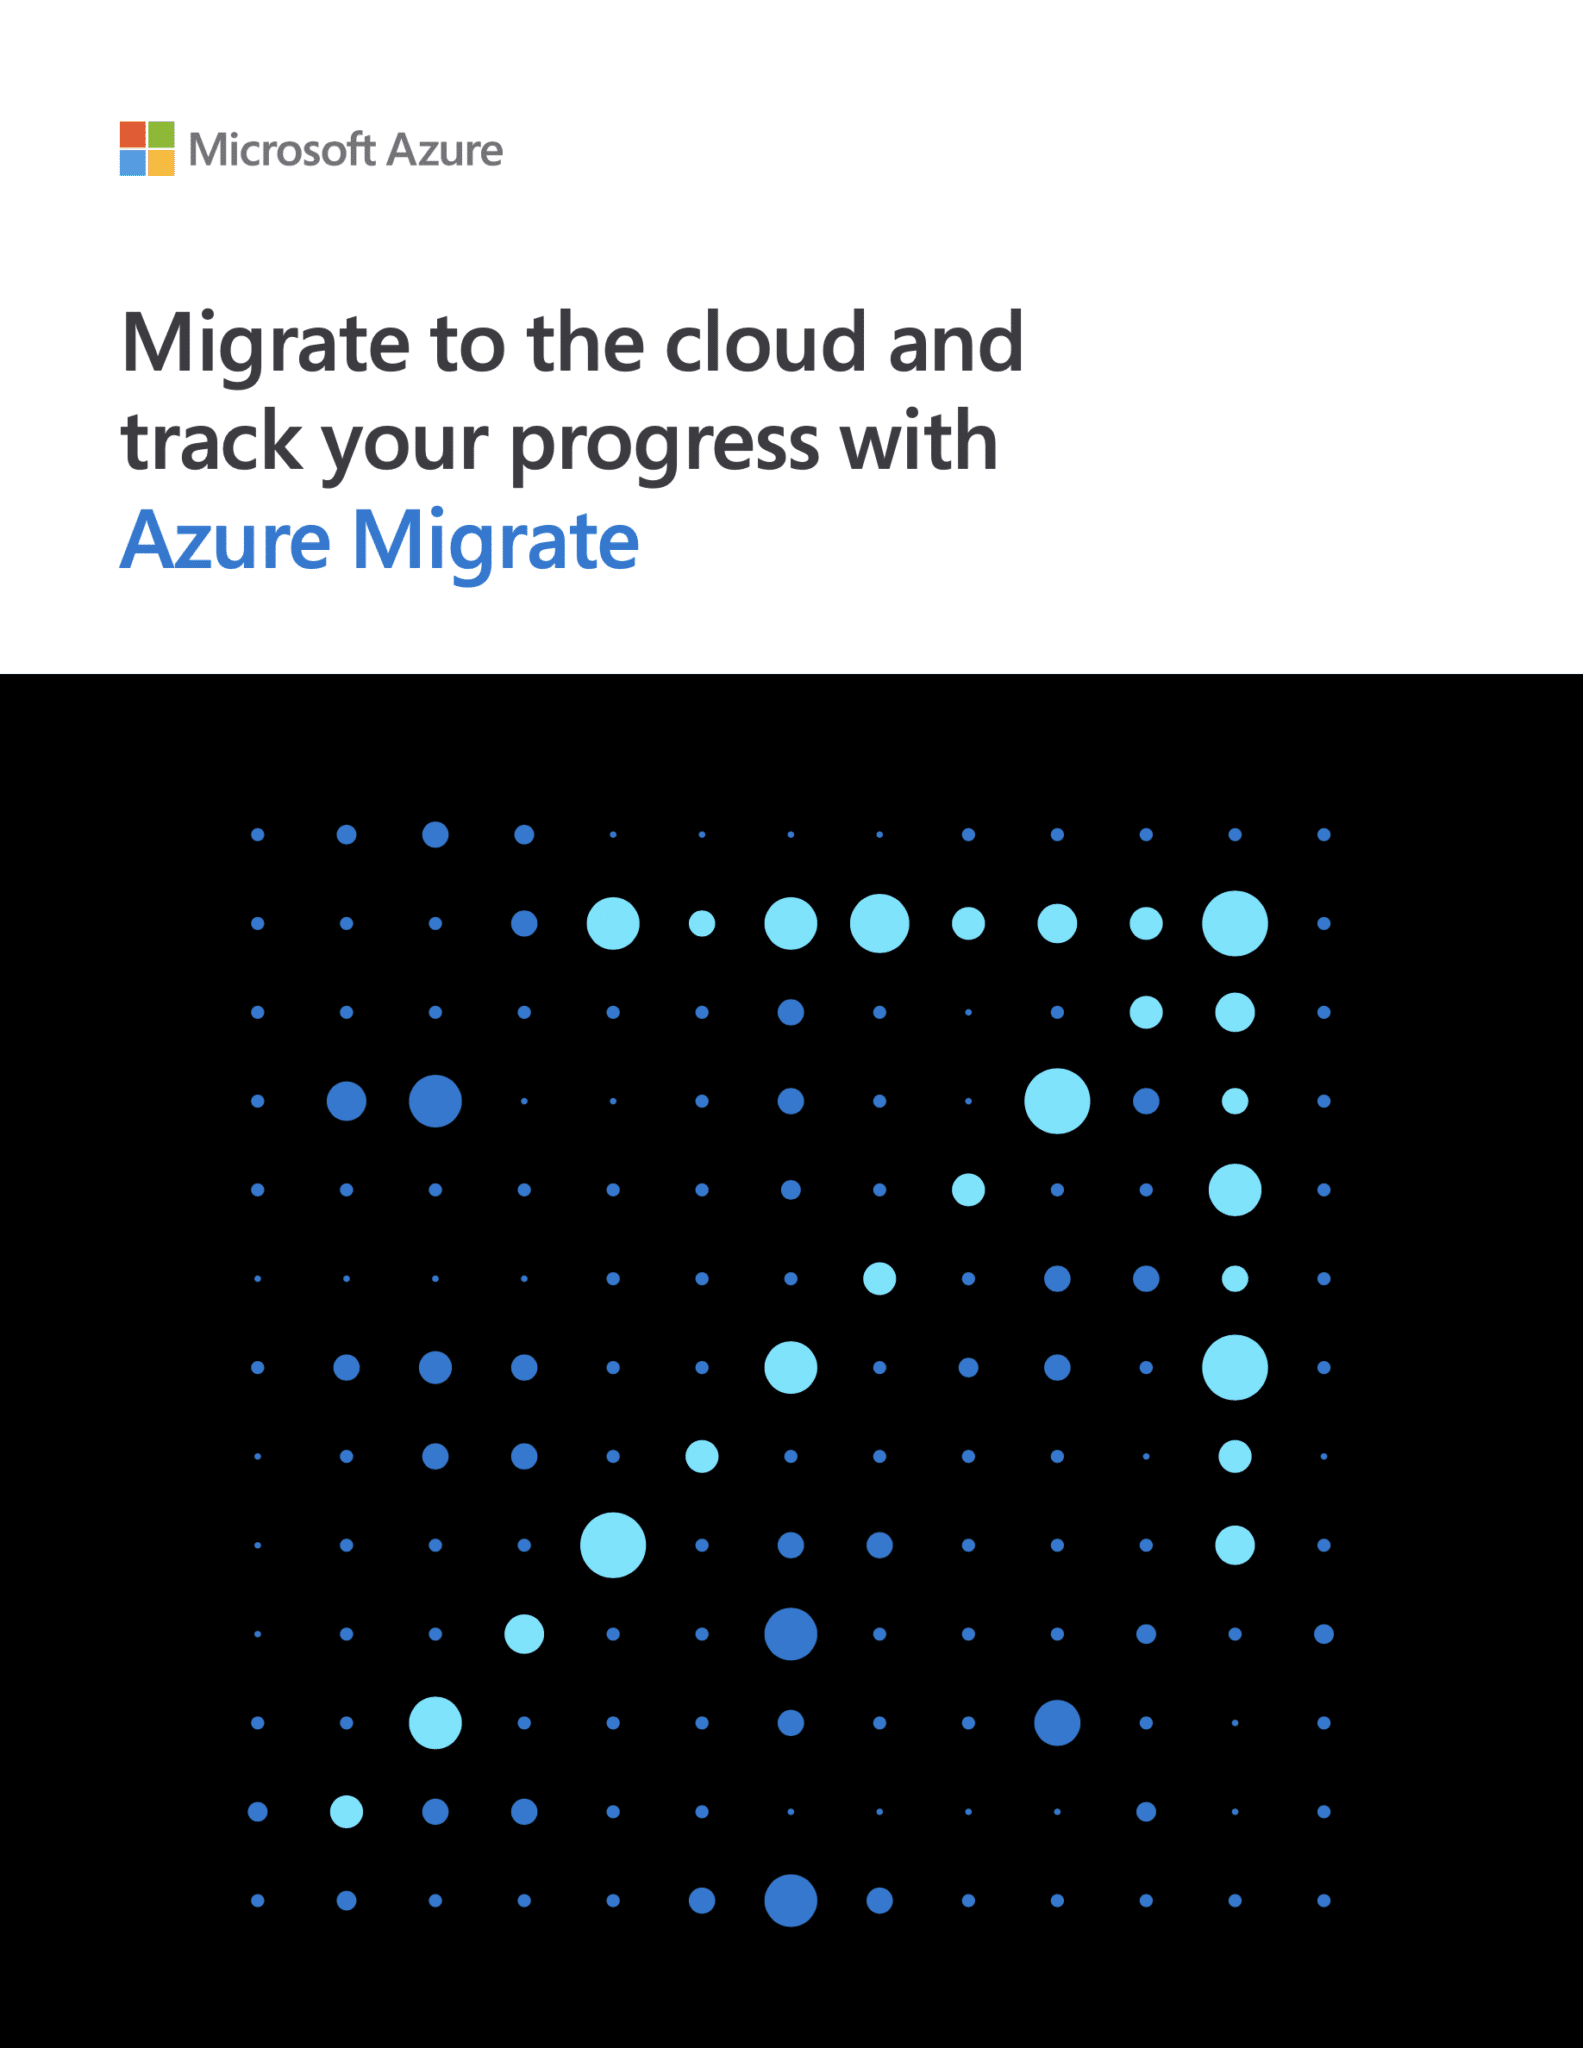 Migrate to the cloud and track your progress with Azure Migrate 2